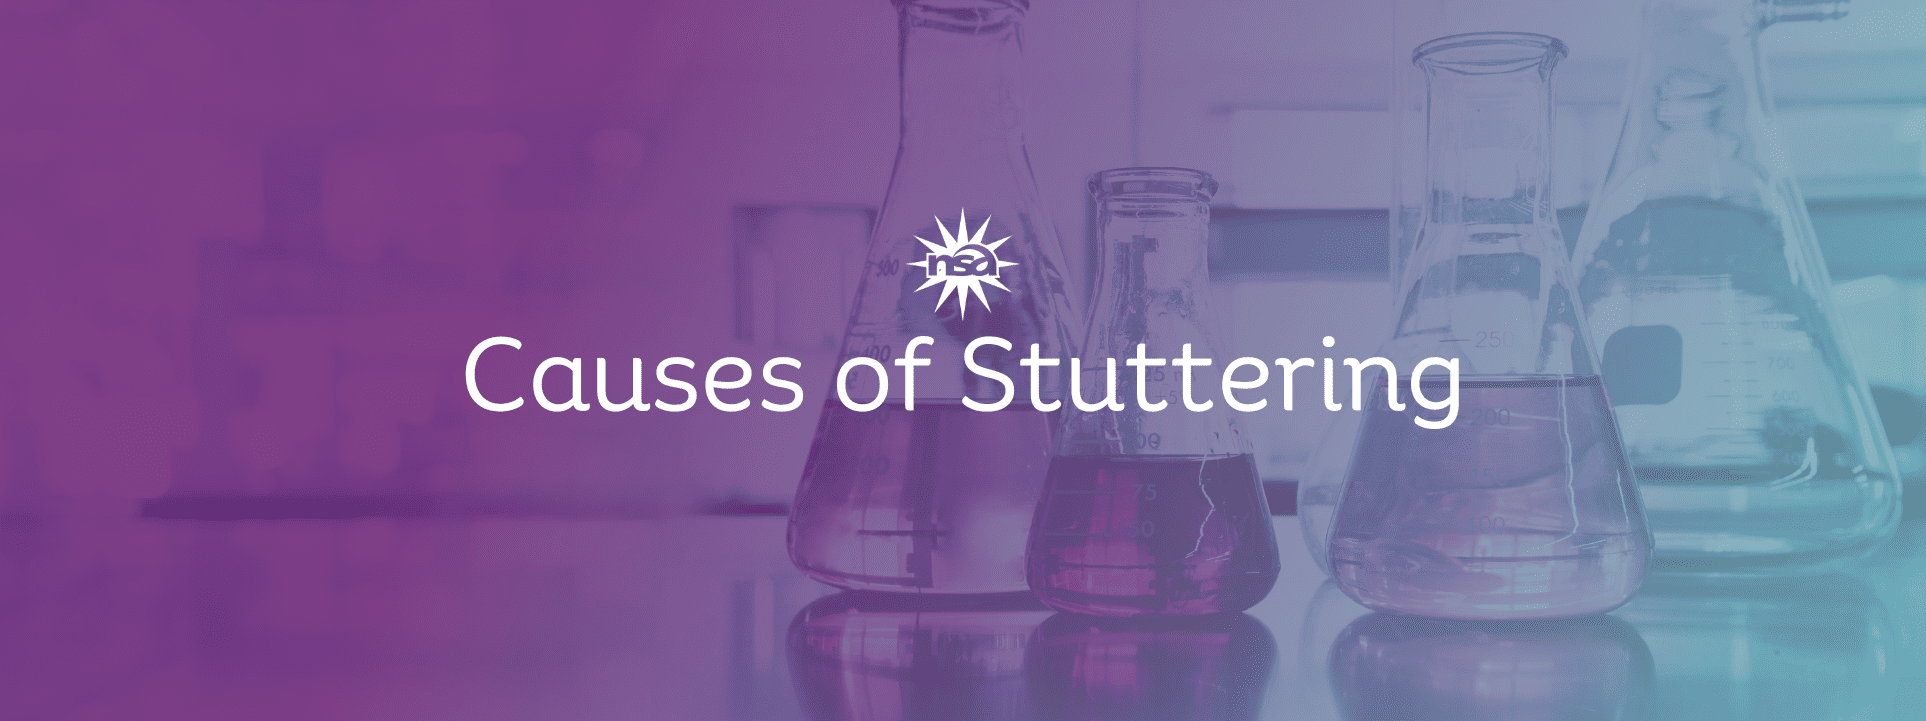 causes of stuttering banner